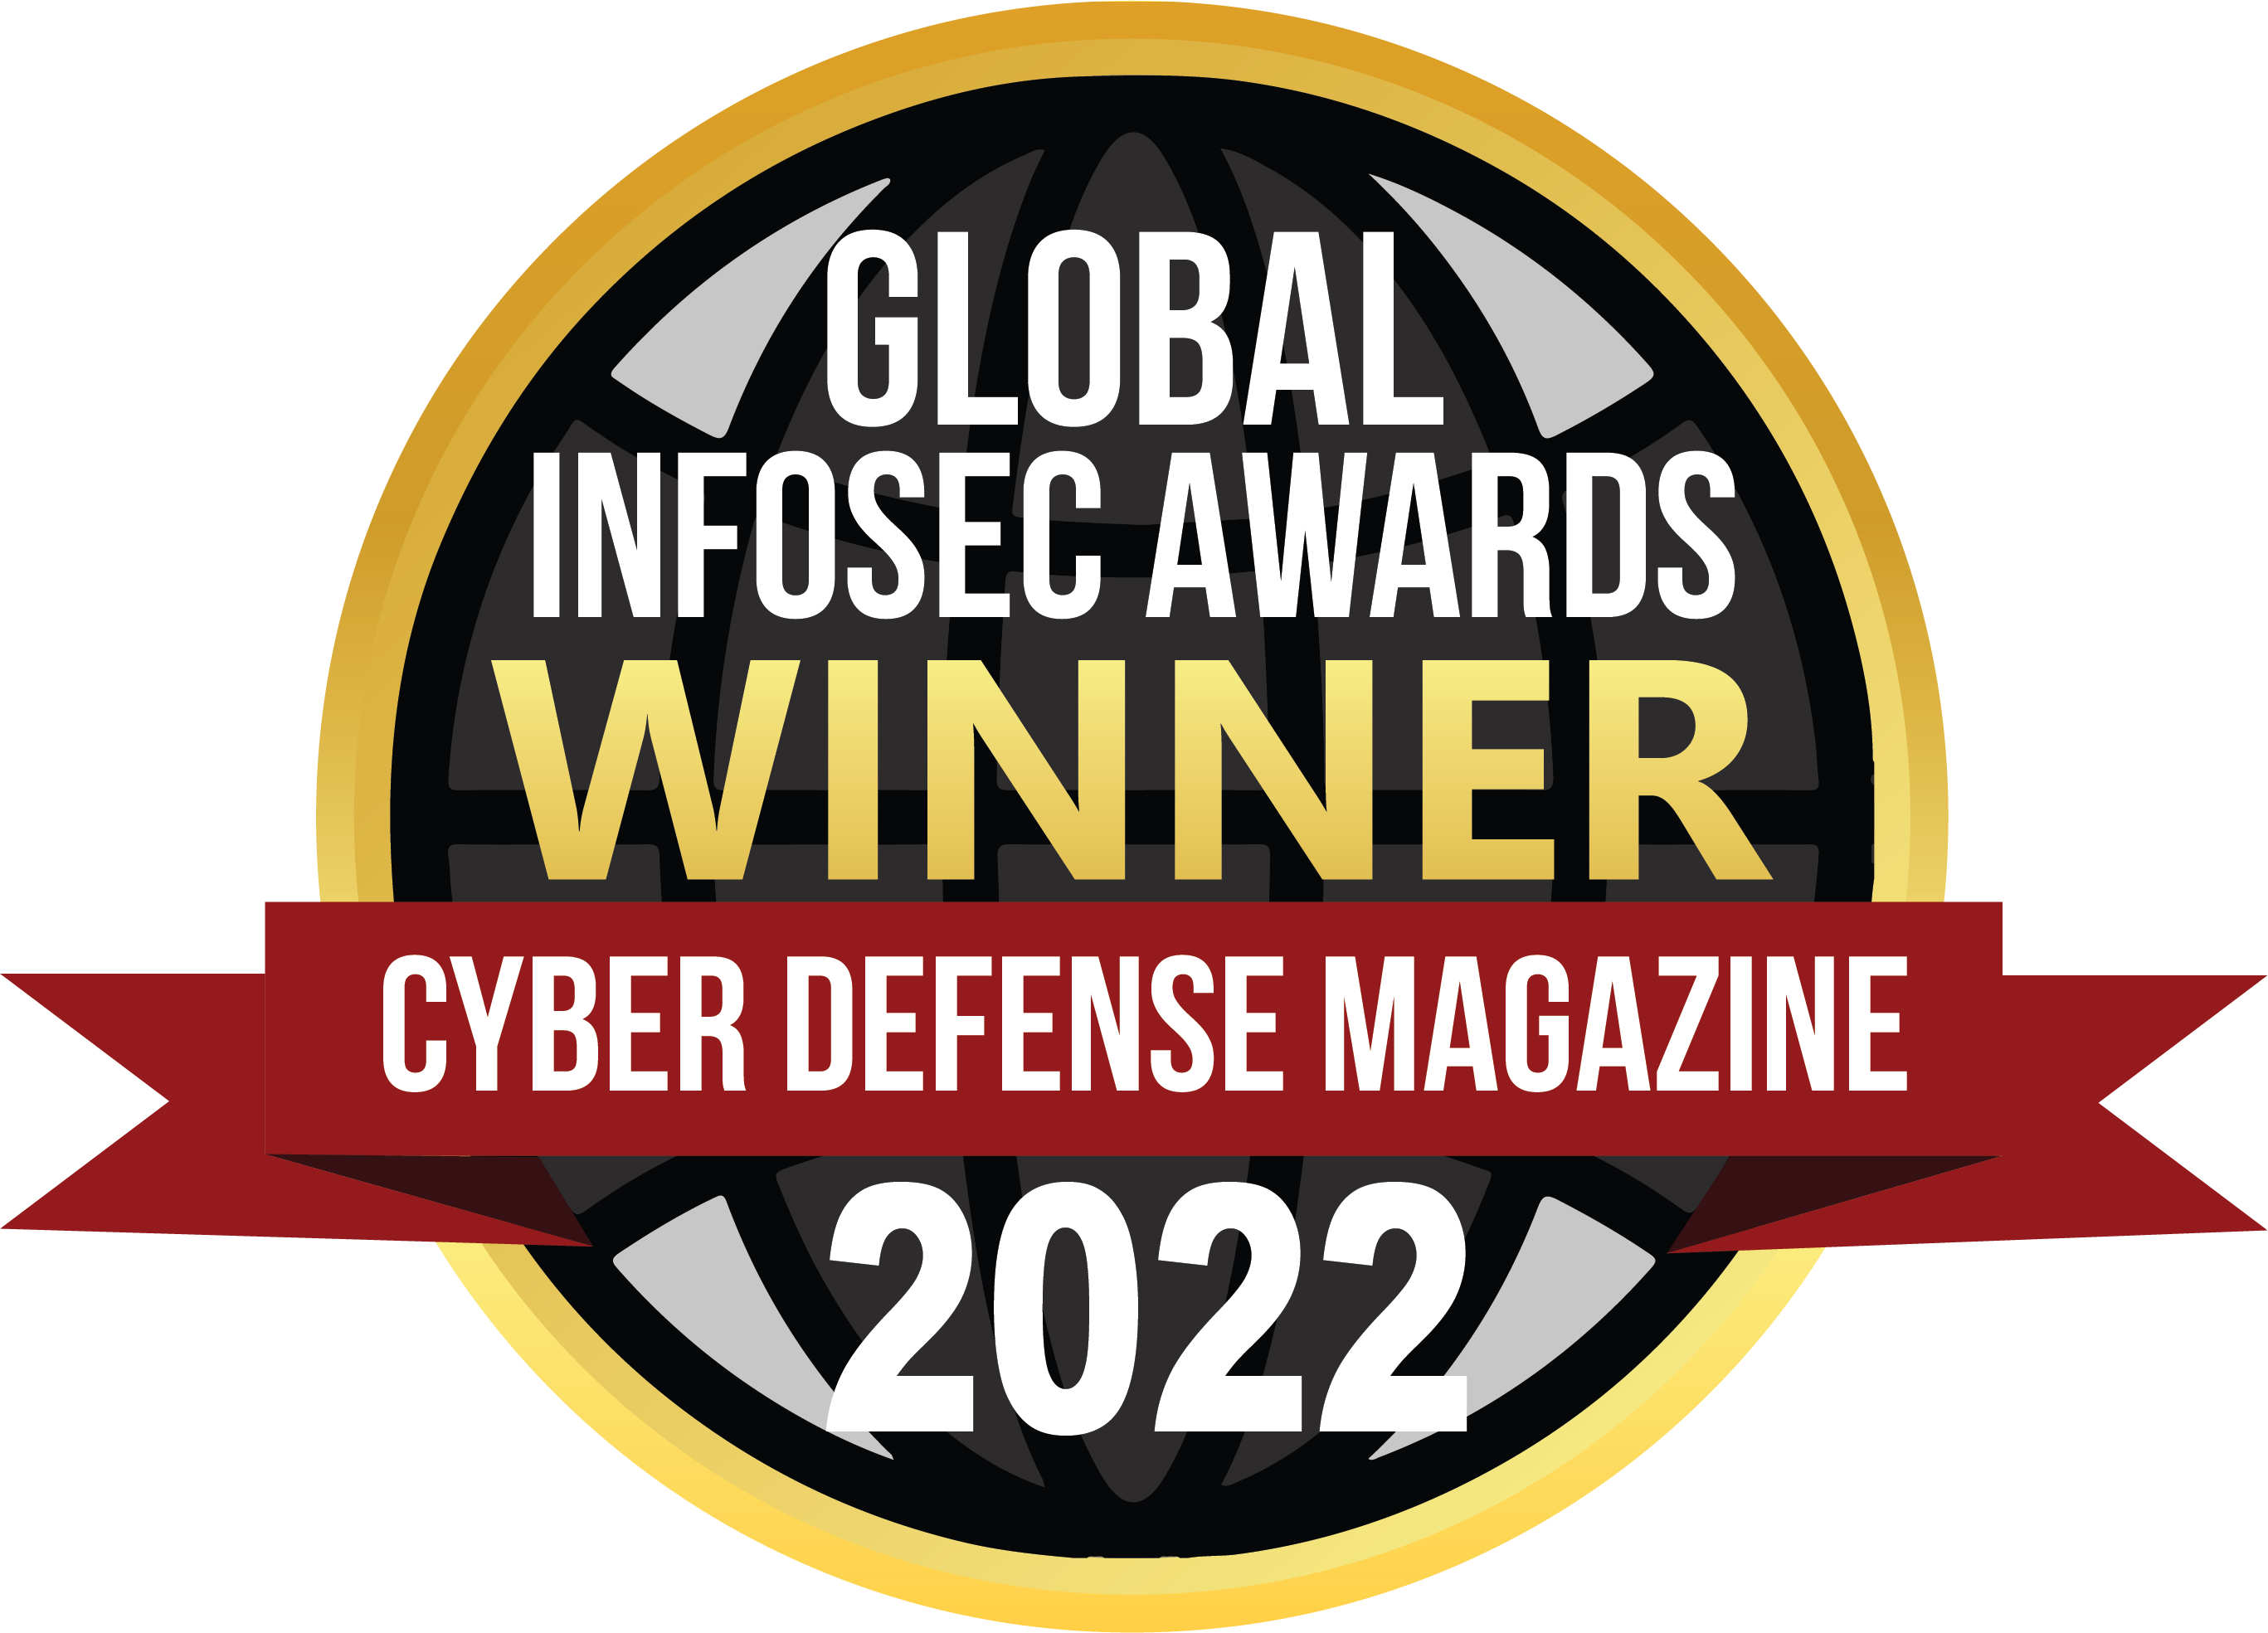 Best Solution: Network Security and Management